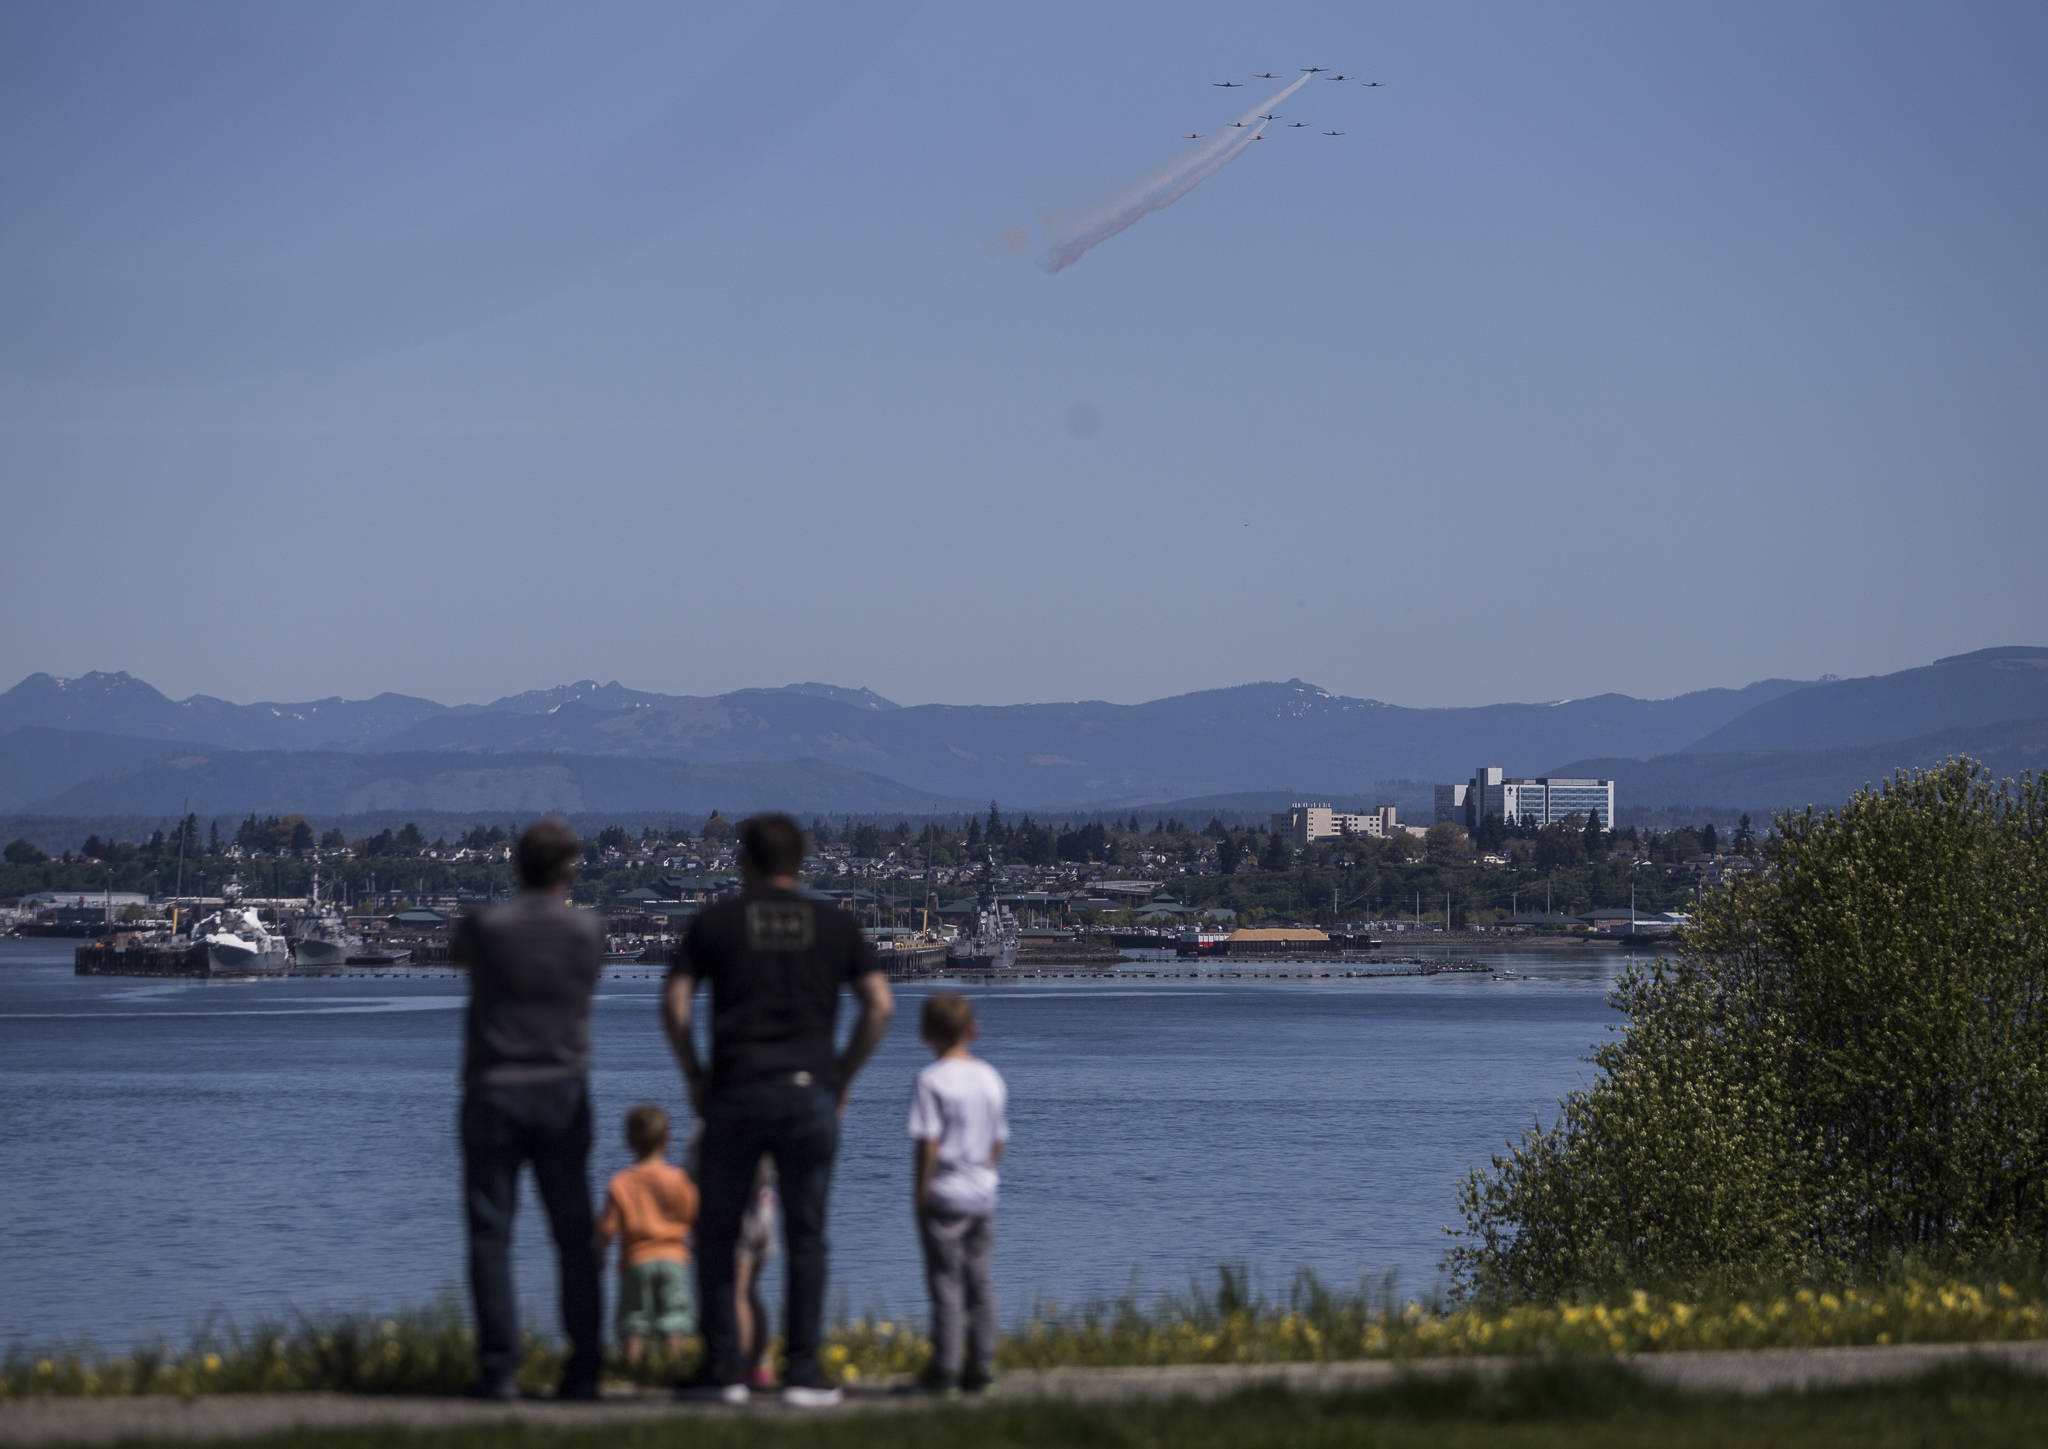 The Huff family watches as the Cascade Warbirds fly over Everett for their V-E Day Remembrance Flight at Harborview Park on Friday in Everett. (Olivia Vanni / The Herald)